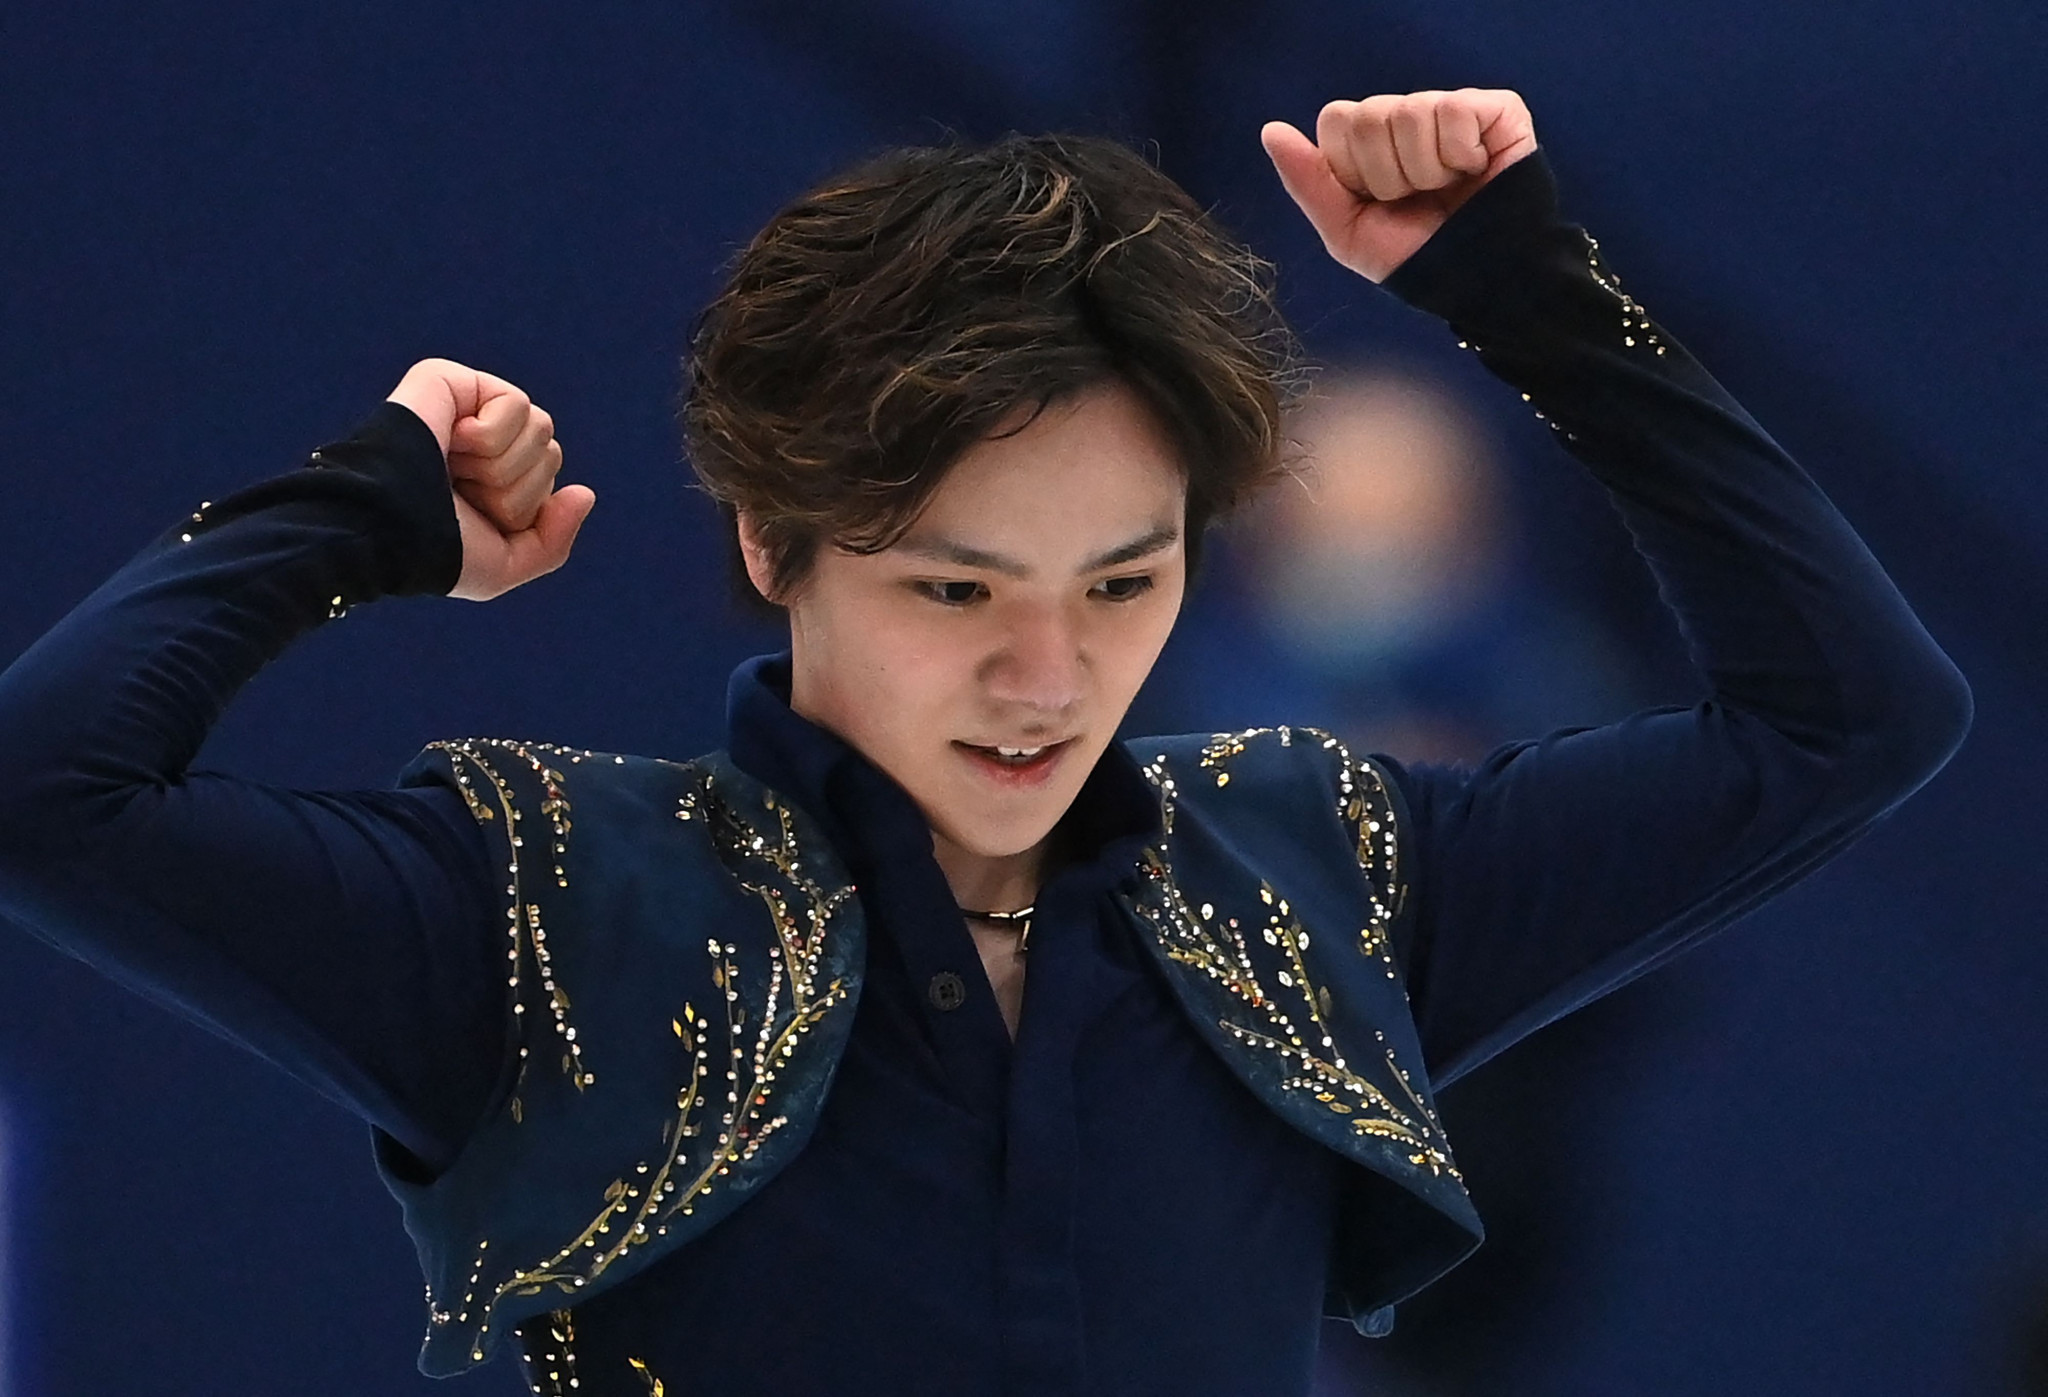 Shoma Uno of Japan is to return at Skate Canada ©Getty Images